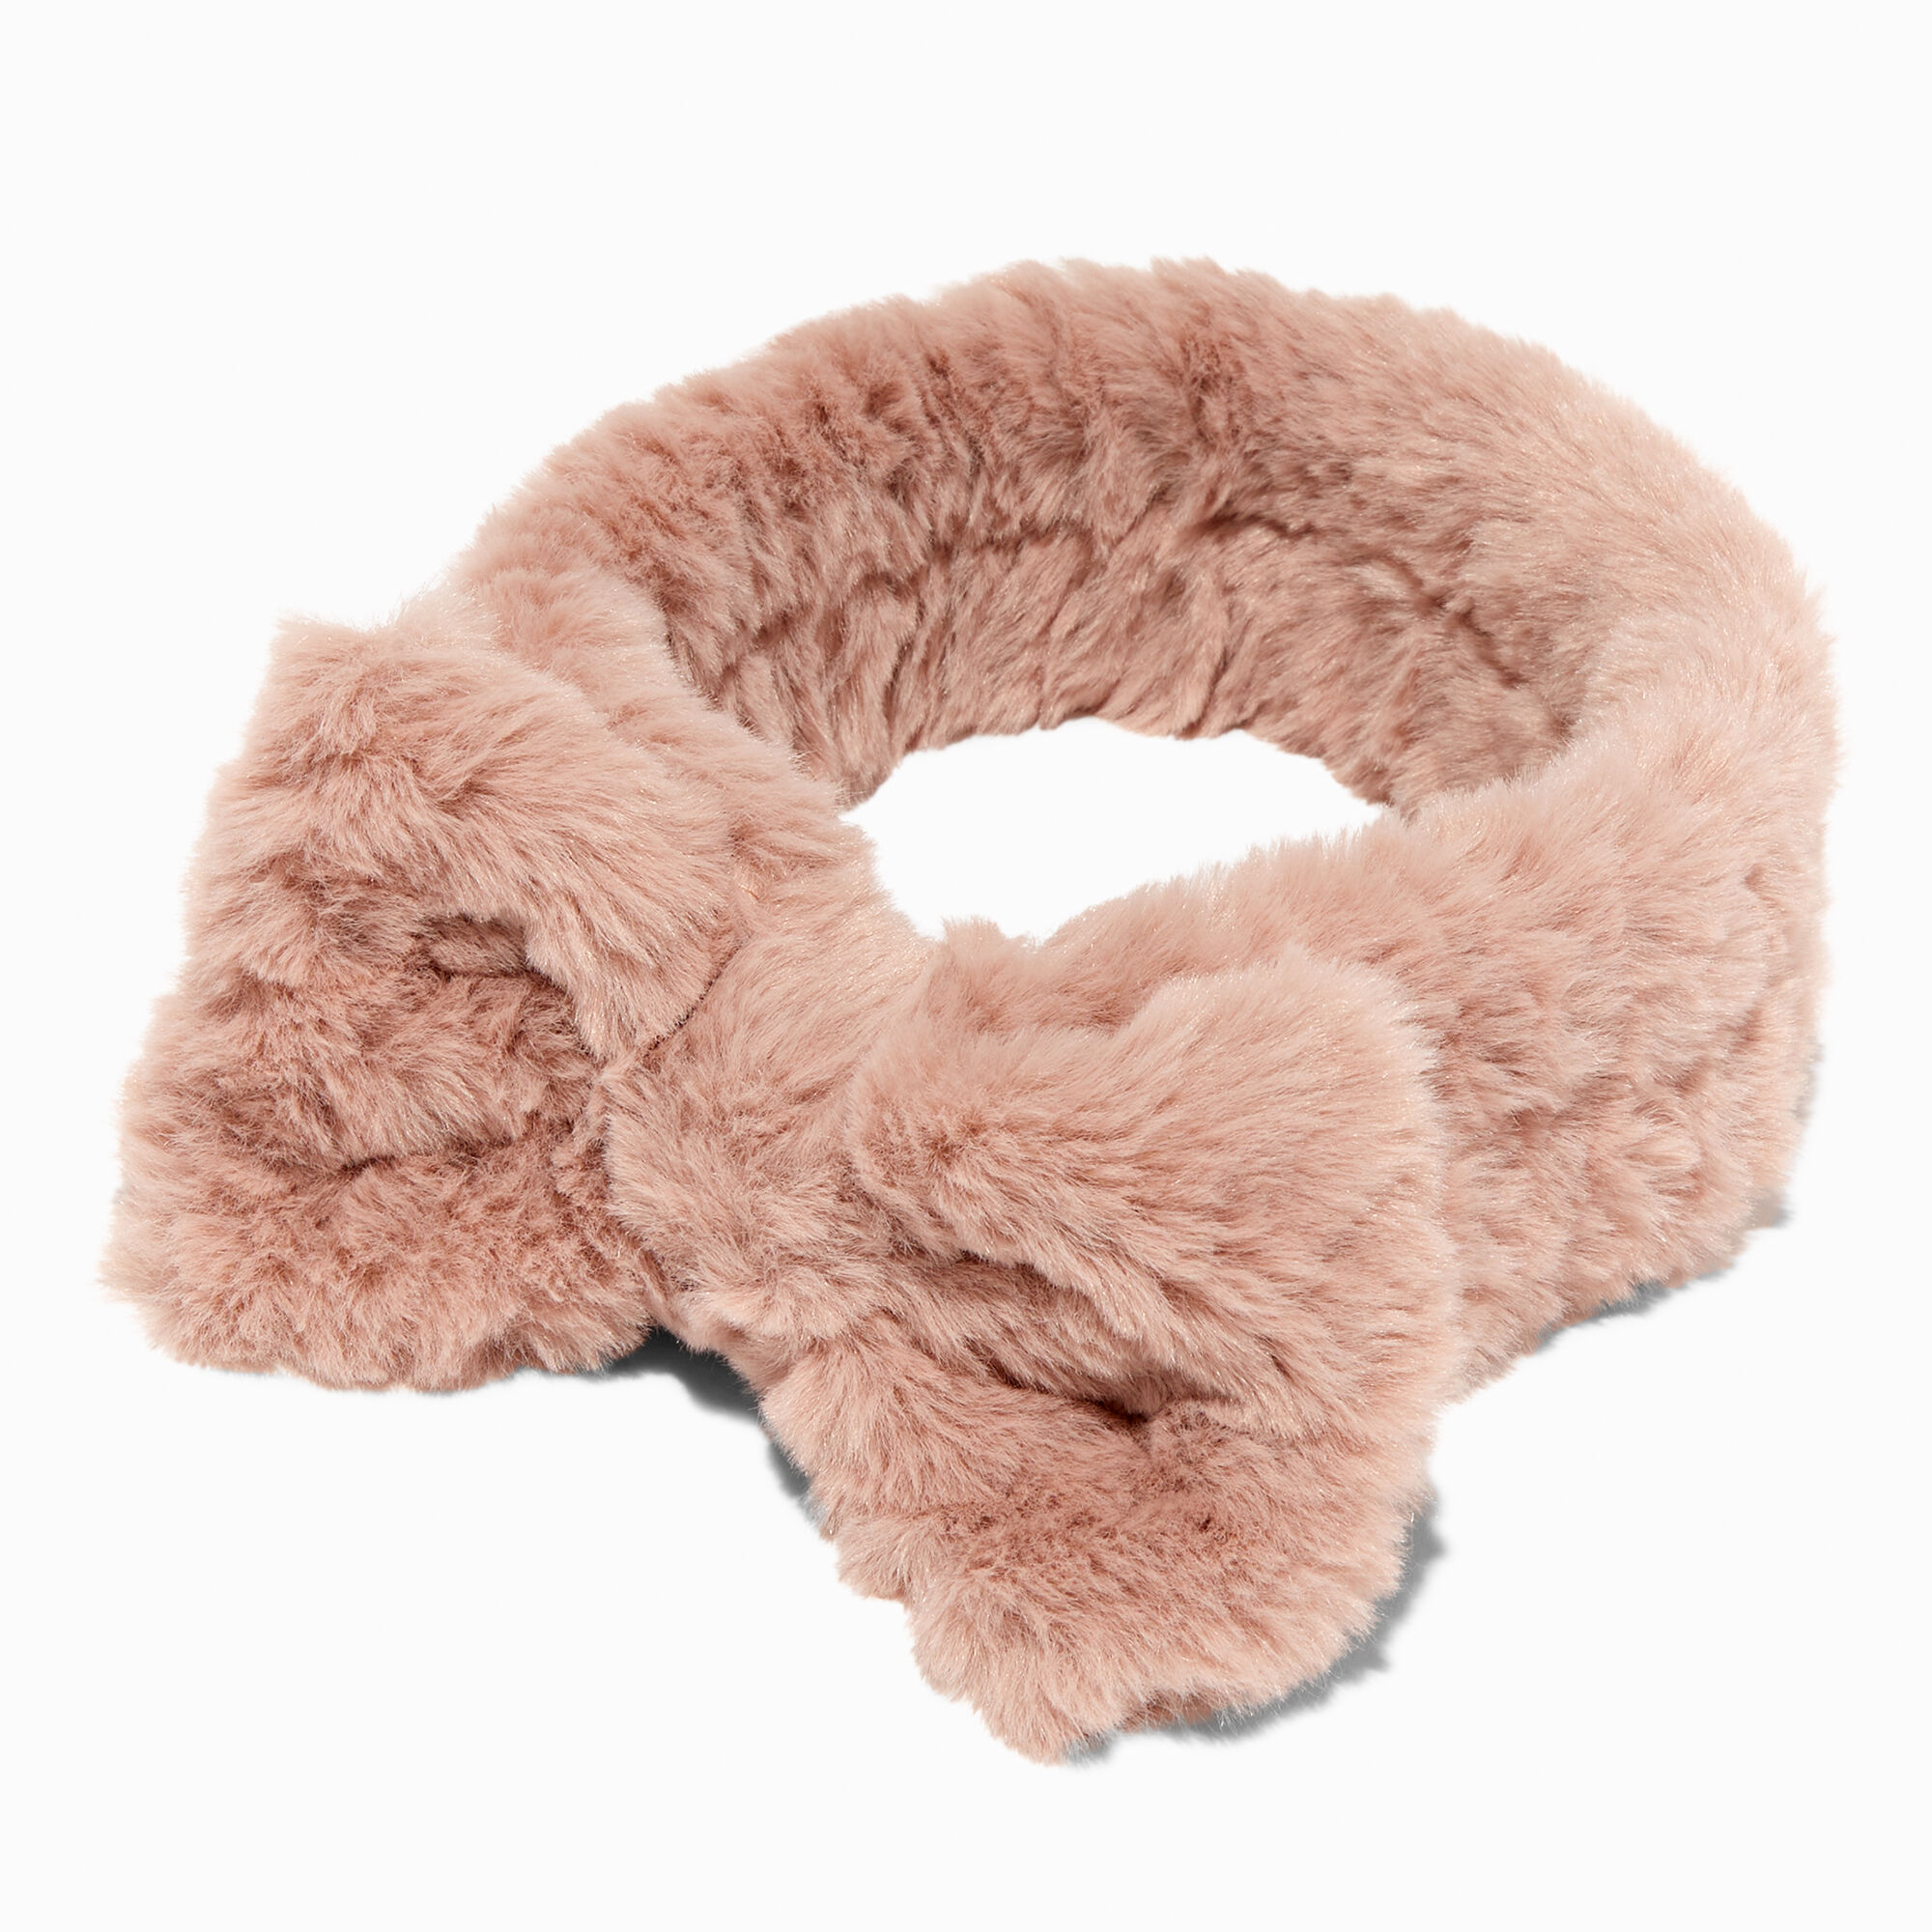 View Claires Nude Furry Makeup Bow Headwrap information